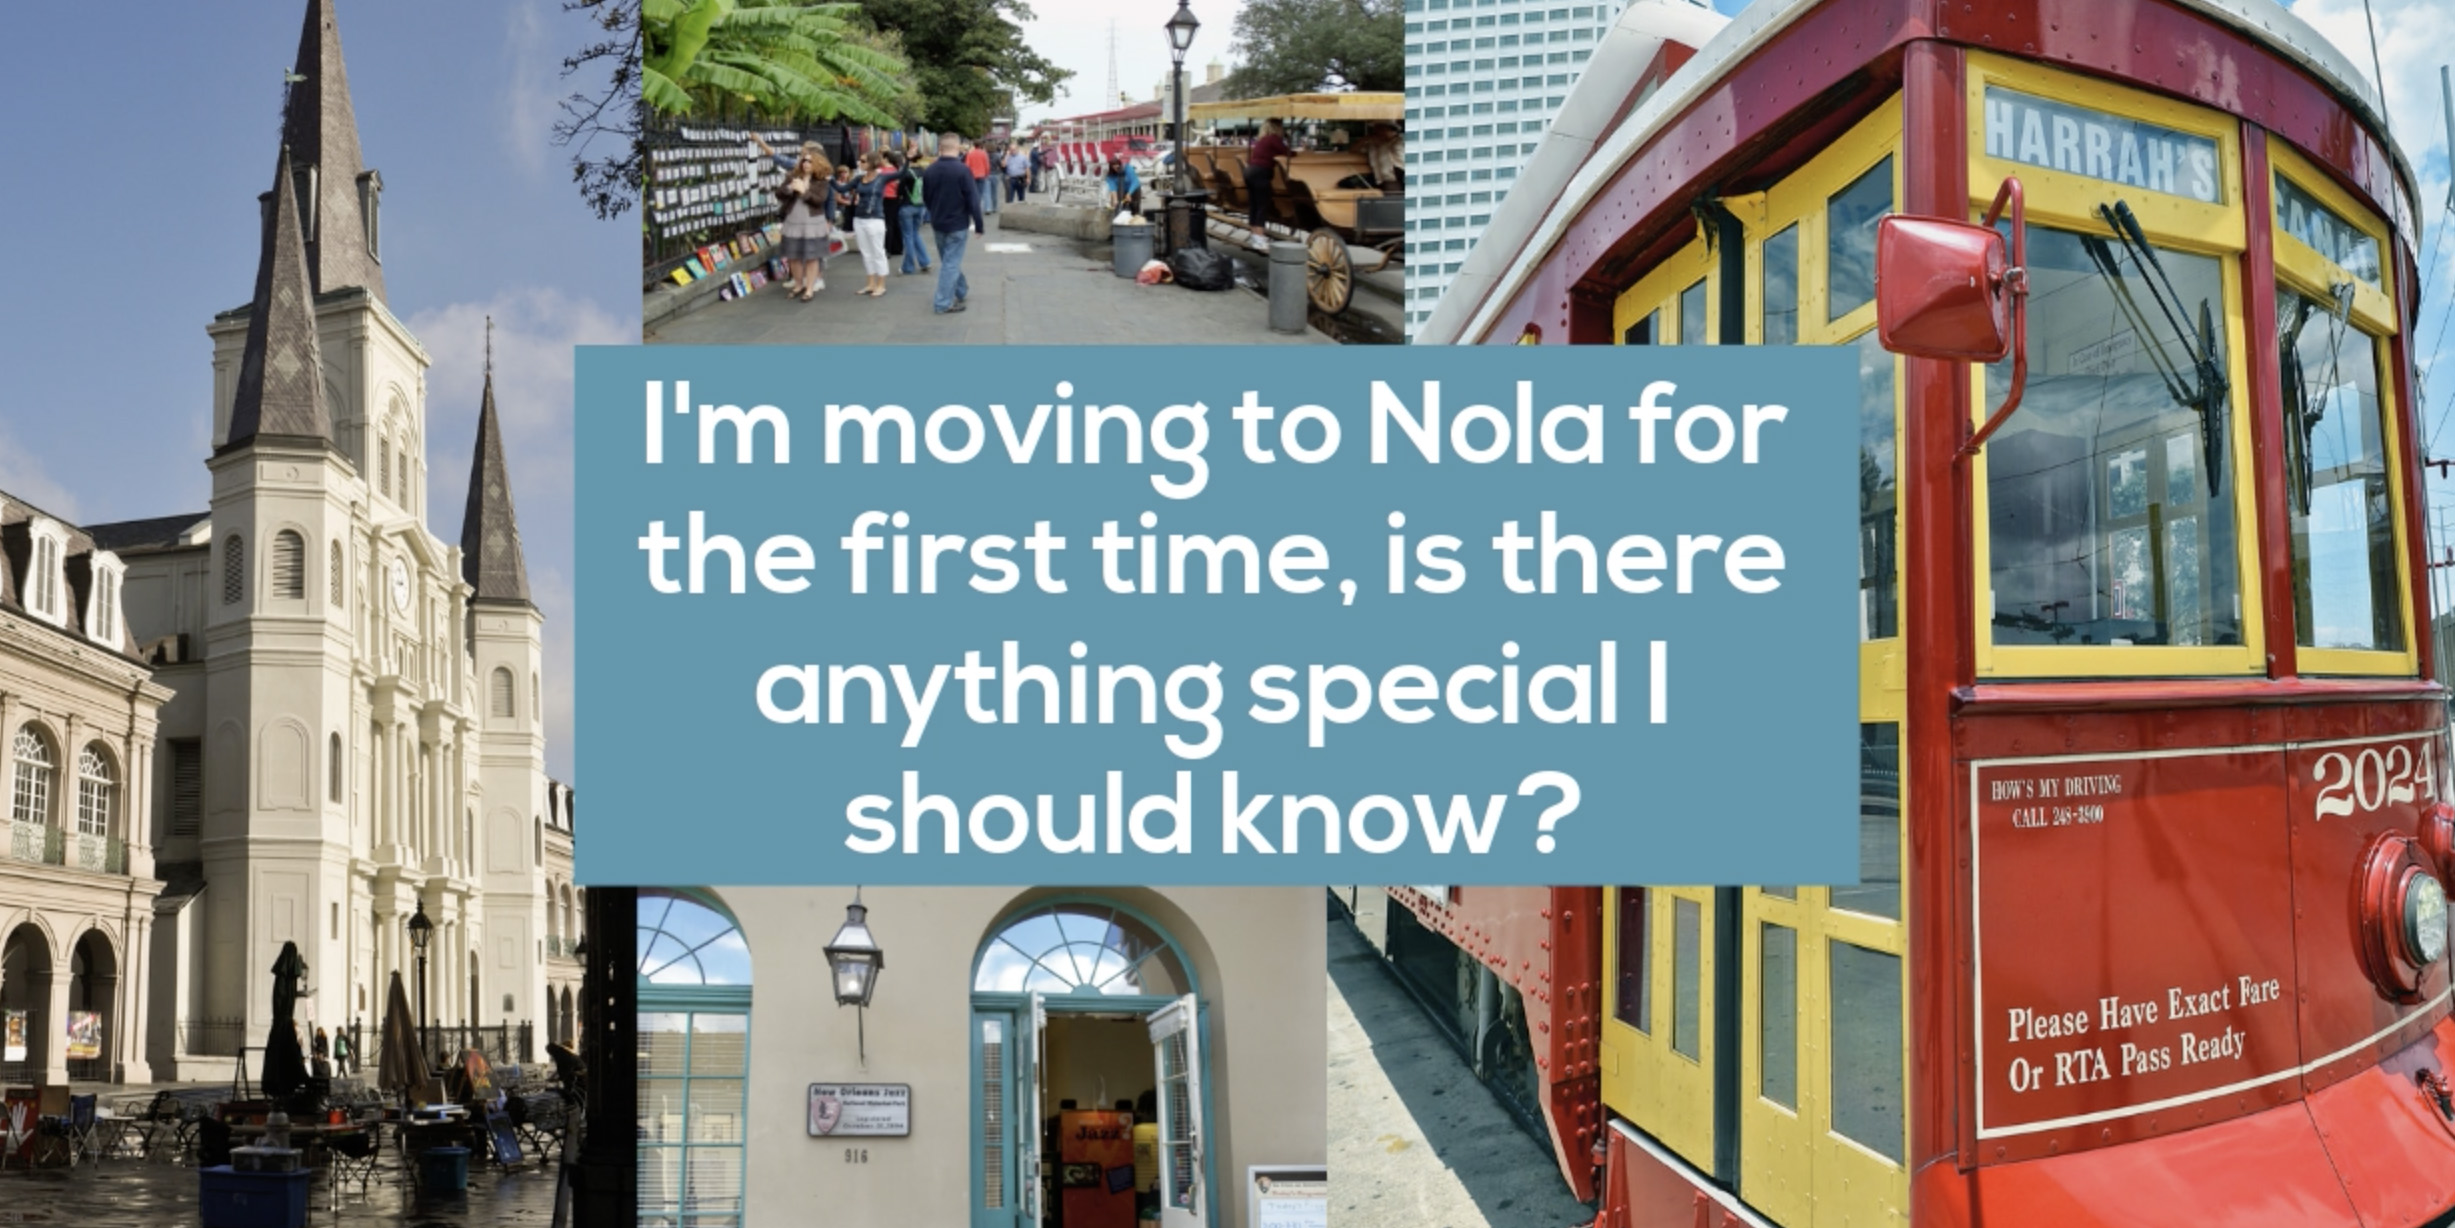 If you're moving to New Orleans, you need a moving checklist to make sure you're prepare - that's why we've compiled these moving resources